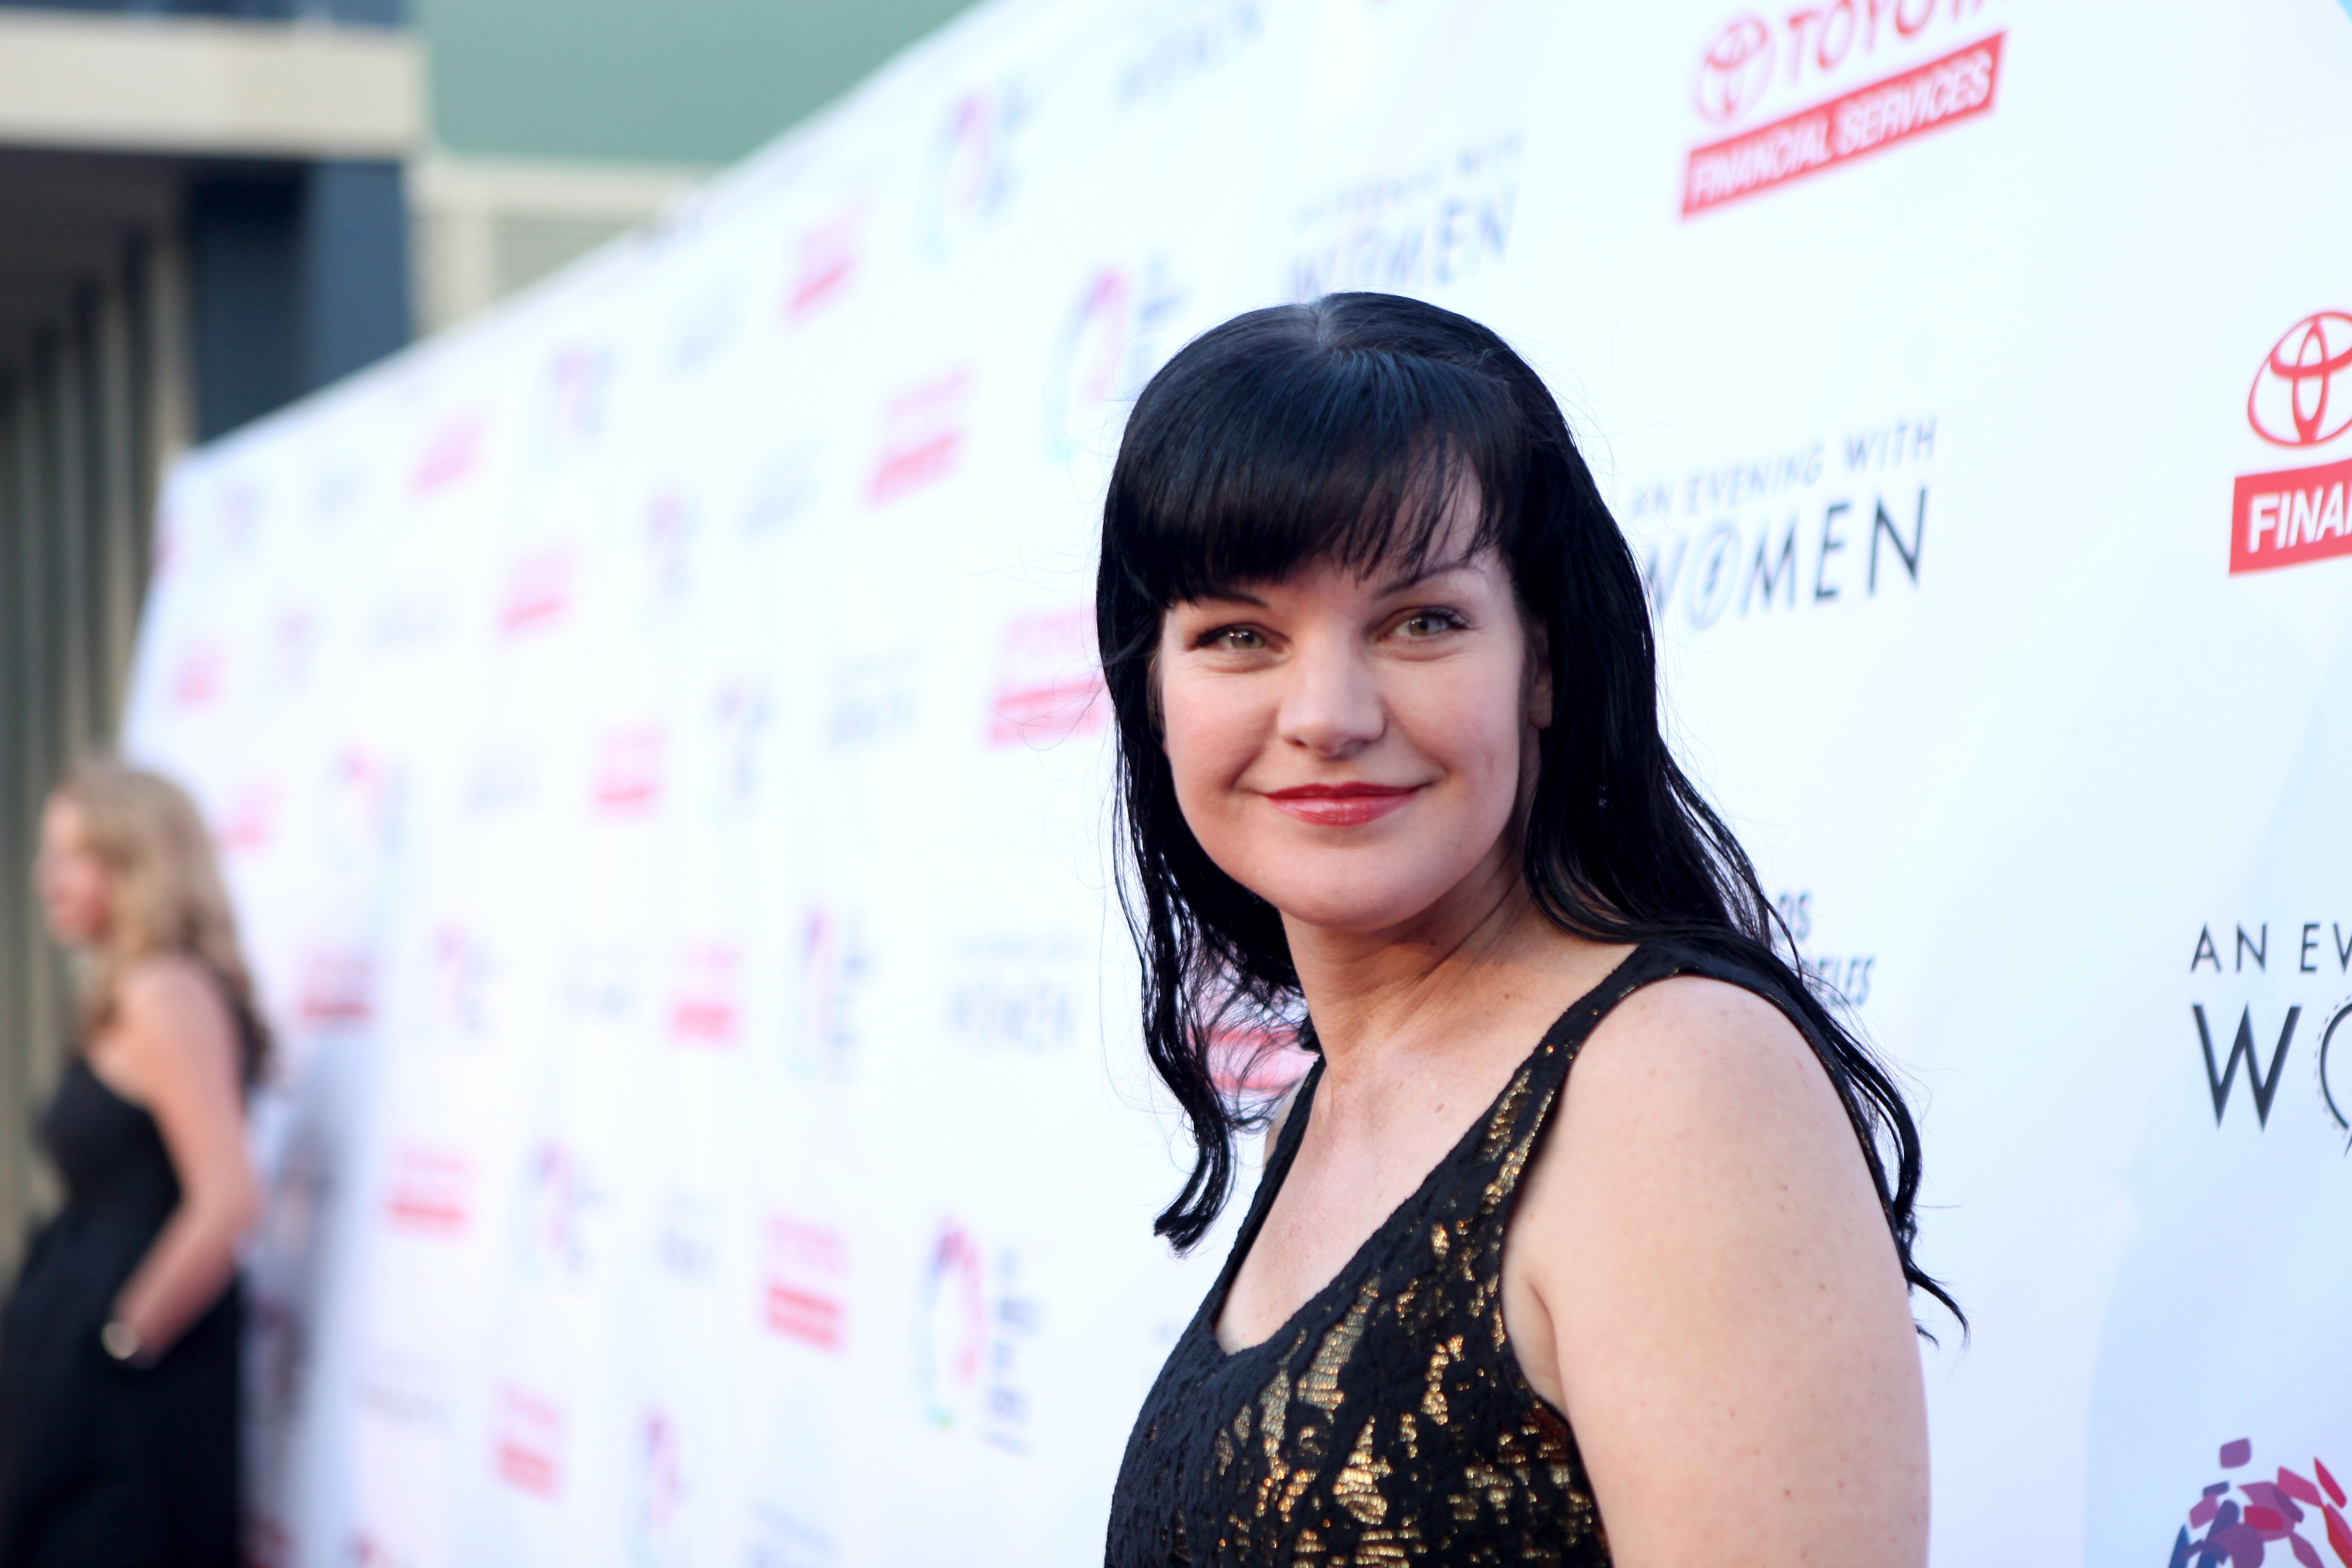 Pauly Perrette attends An Evening with Women benefiting the Los Angeles LGBT Center on May 21, 2016 | Photo: GettyImages